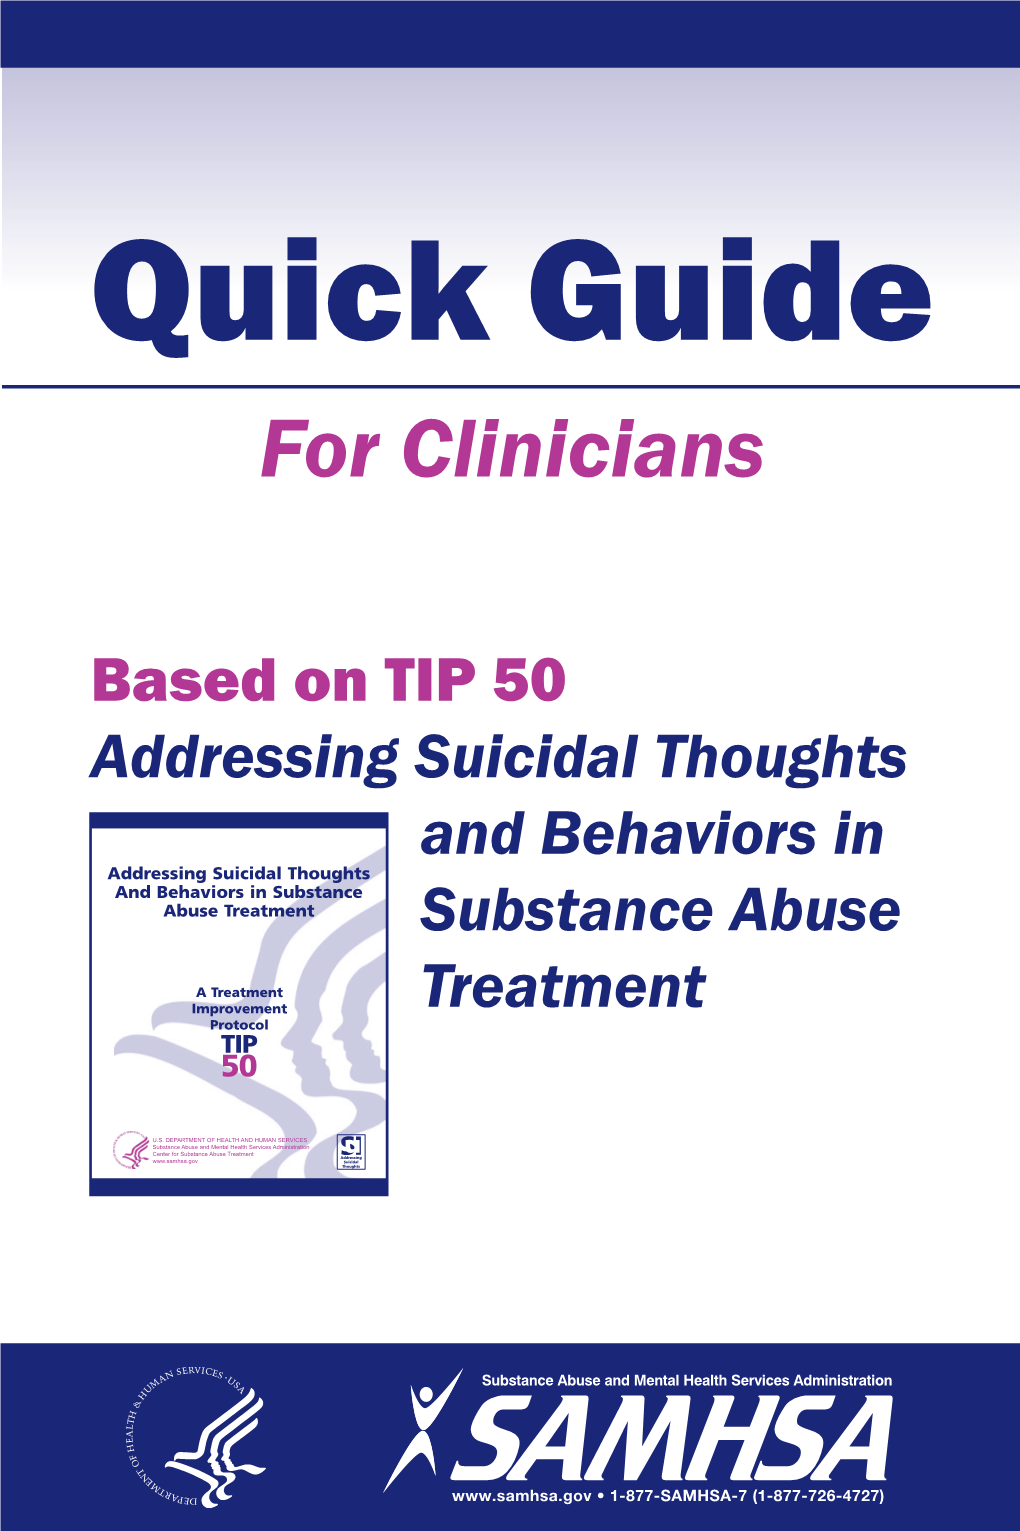 Quick Guide for Clinicians Based on TIP 50 Addressing Suicidal Thoughts and Behaviors in Substance Abuse Treamtent